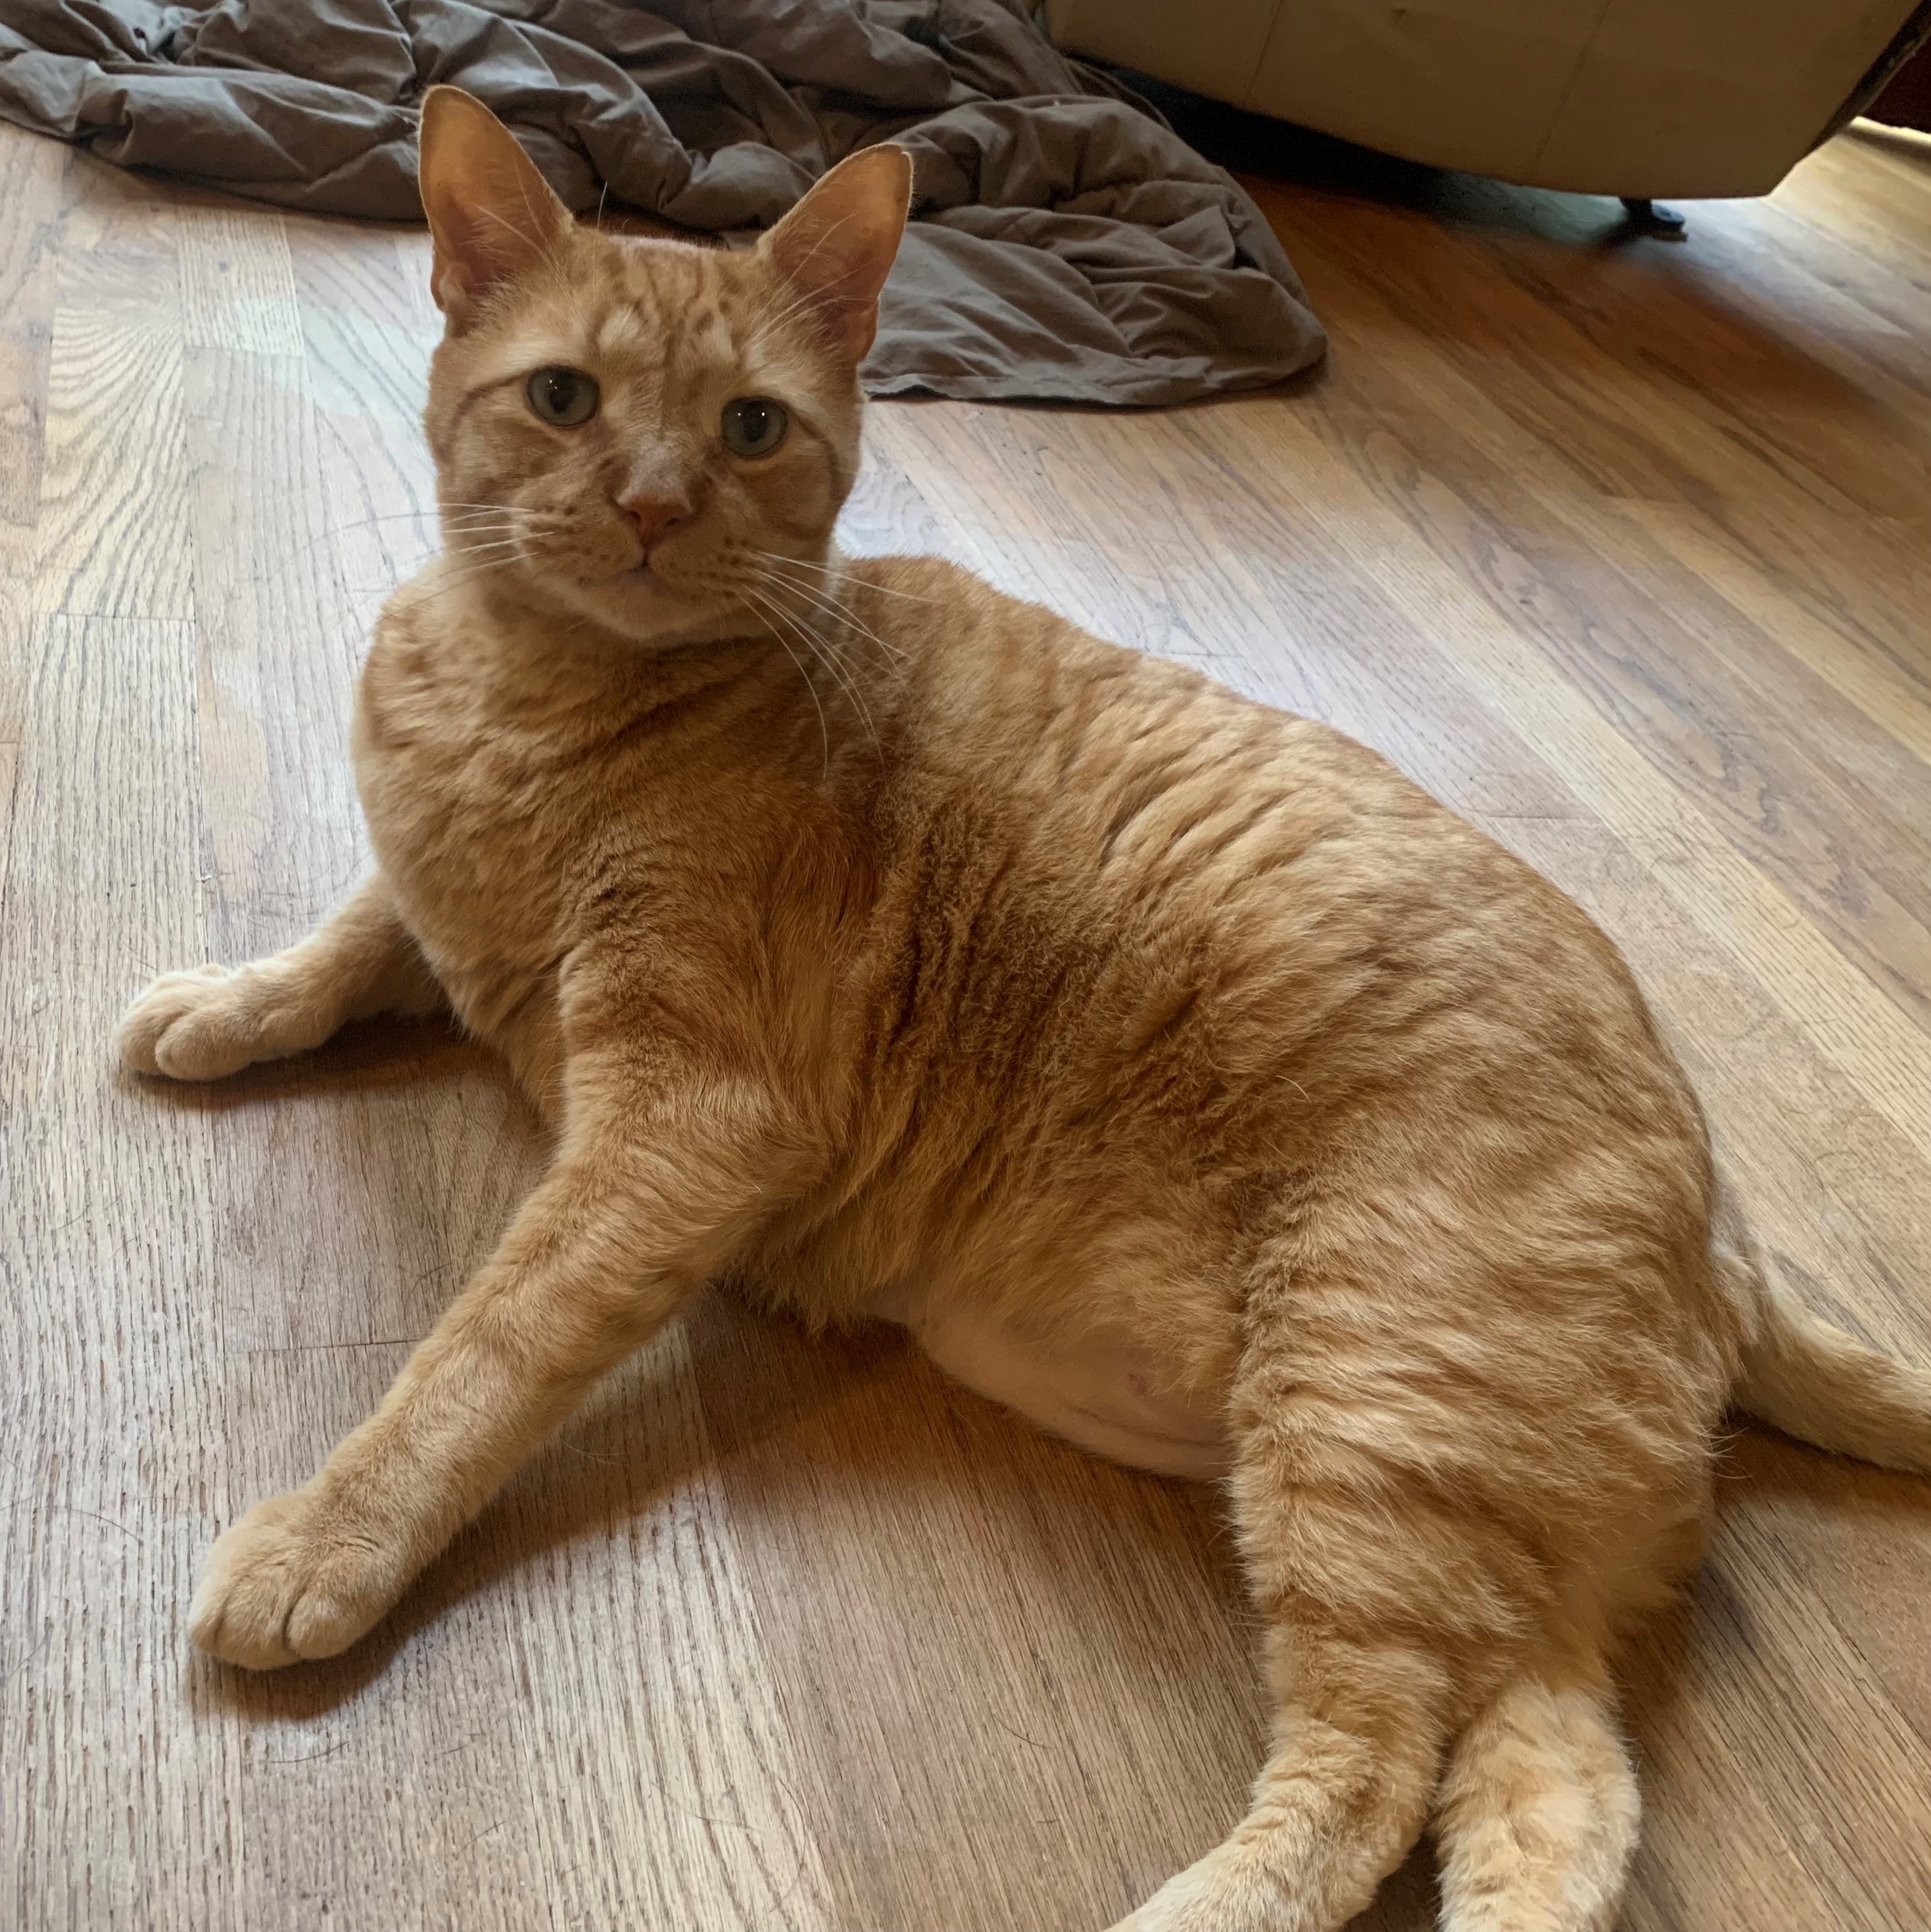 a picture of stanley lounging on the floor. he is laying on his right side, propping himself up a bit with his front paws while his hind legs cross next to him. he is looking expectantly at the camera